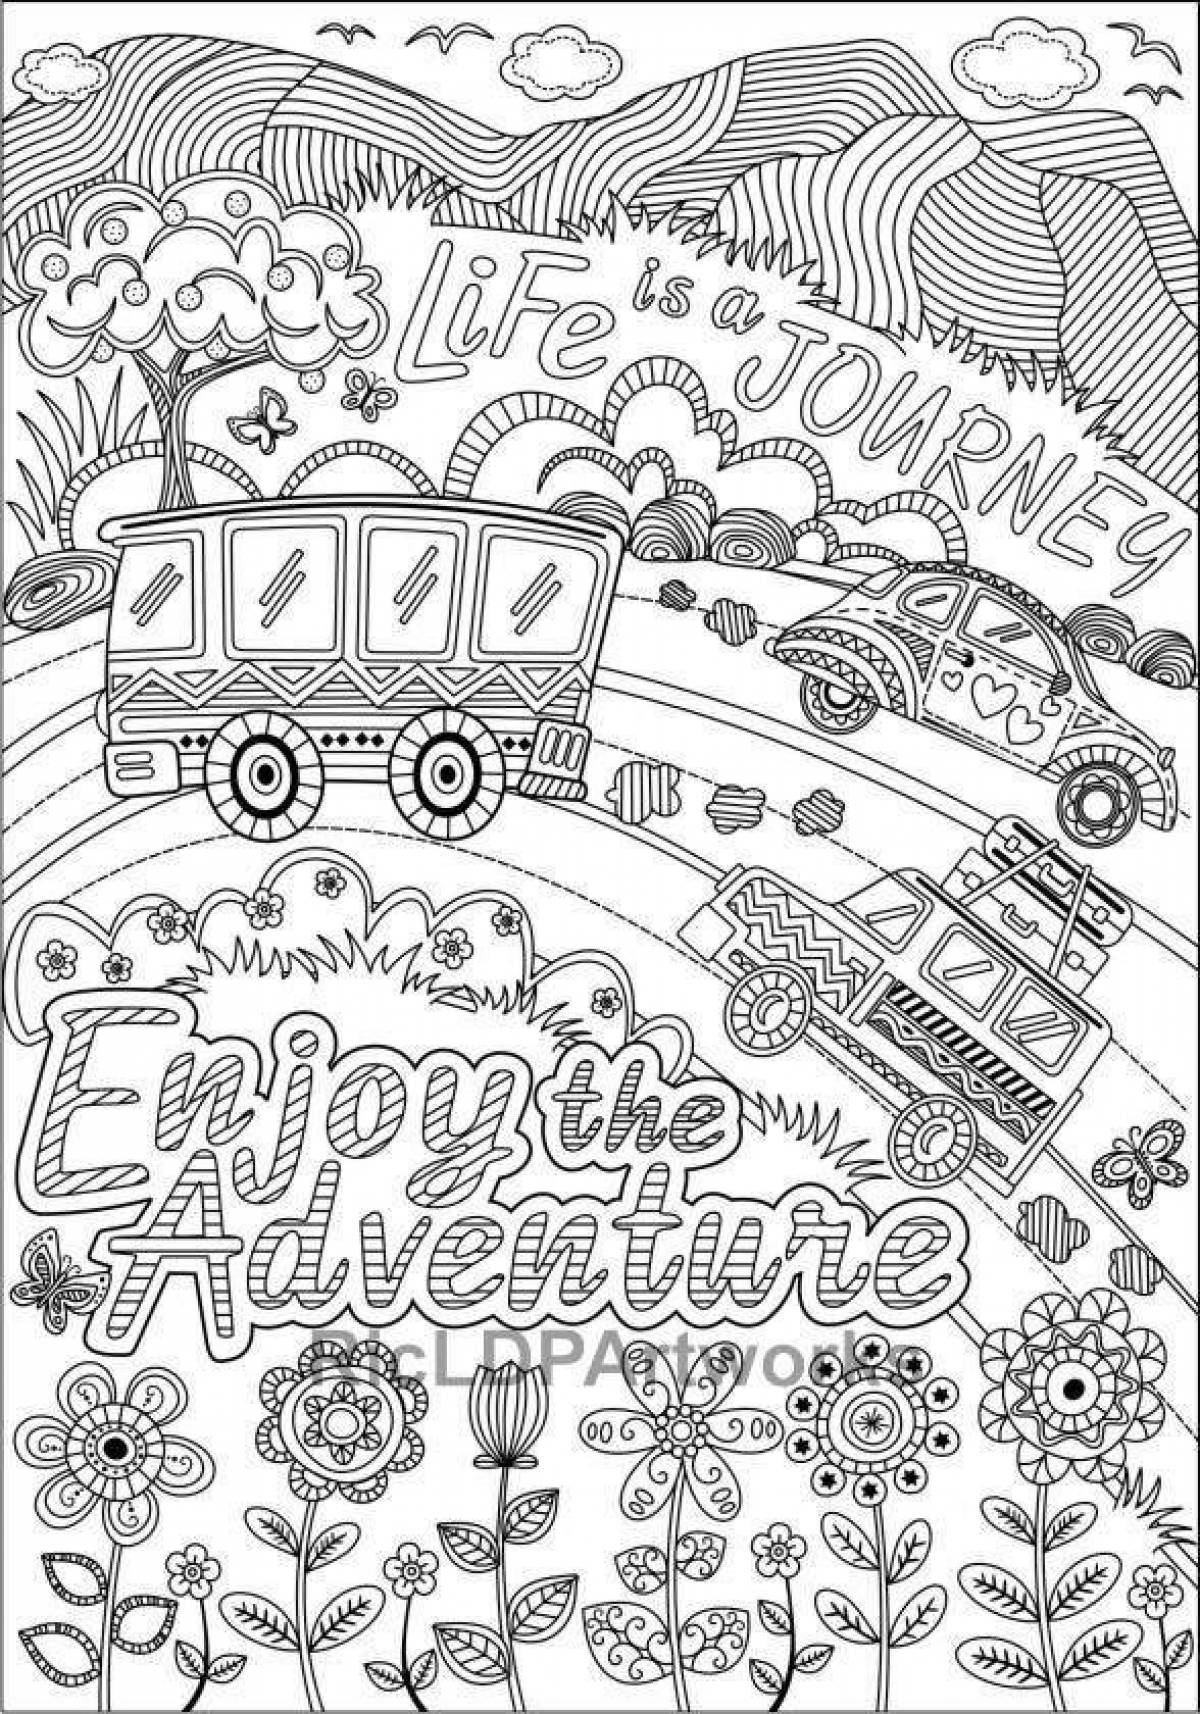 A fun indie coloring book for kids